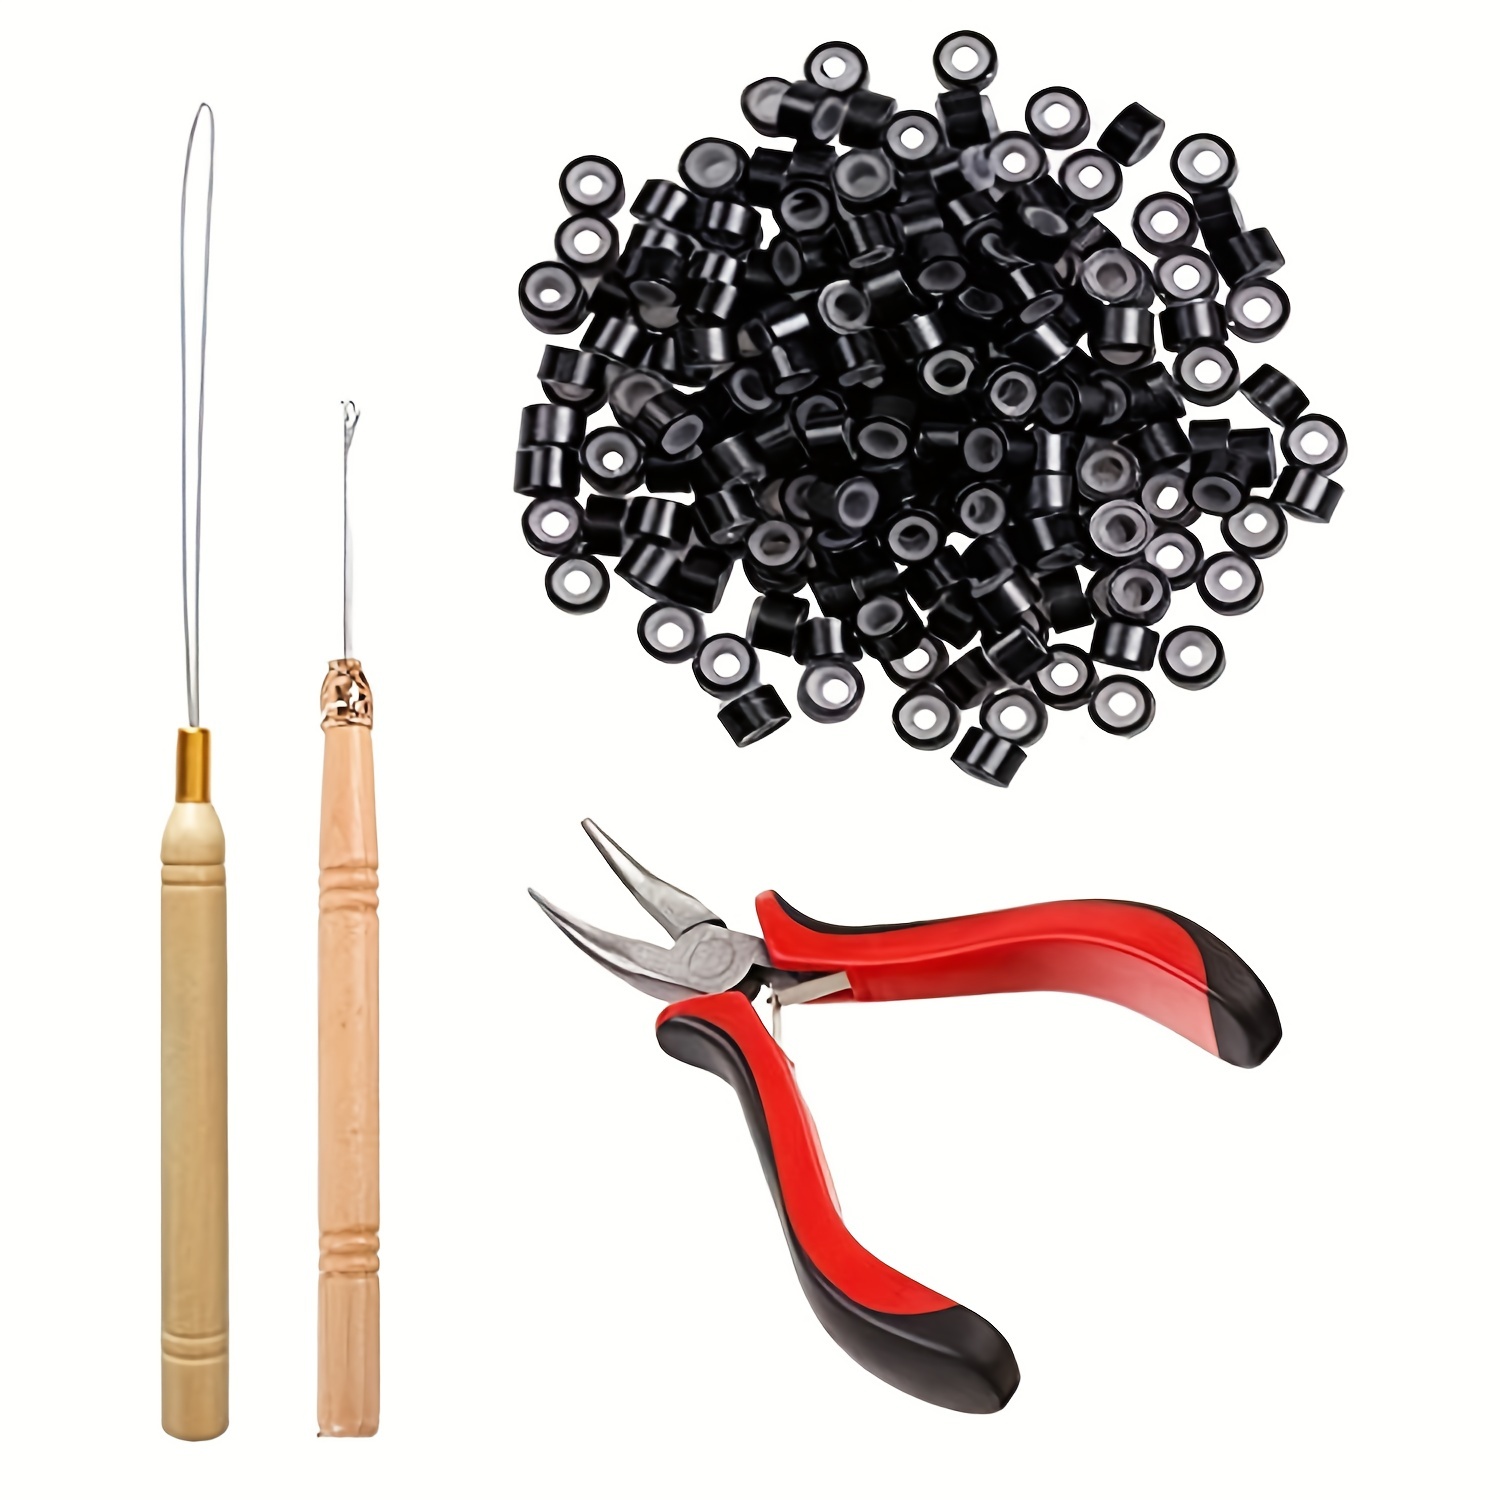 Professional Hair Extension & Beading Tool Kit Remove Plier Set for beads  (4 Piece) I-Link Micro Ring Loop Needle Pulling Hook Threader Wire for